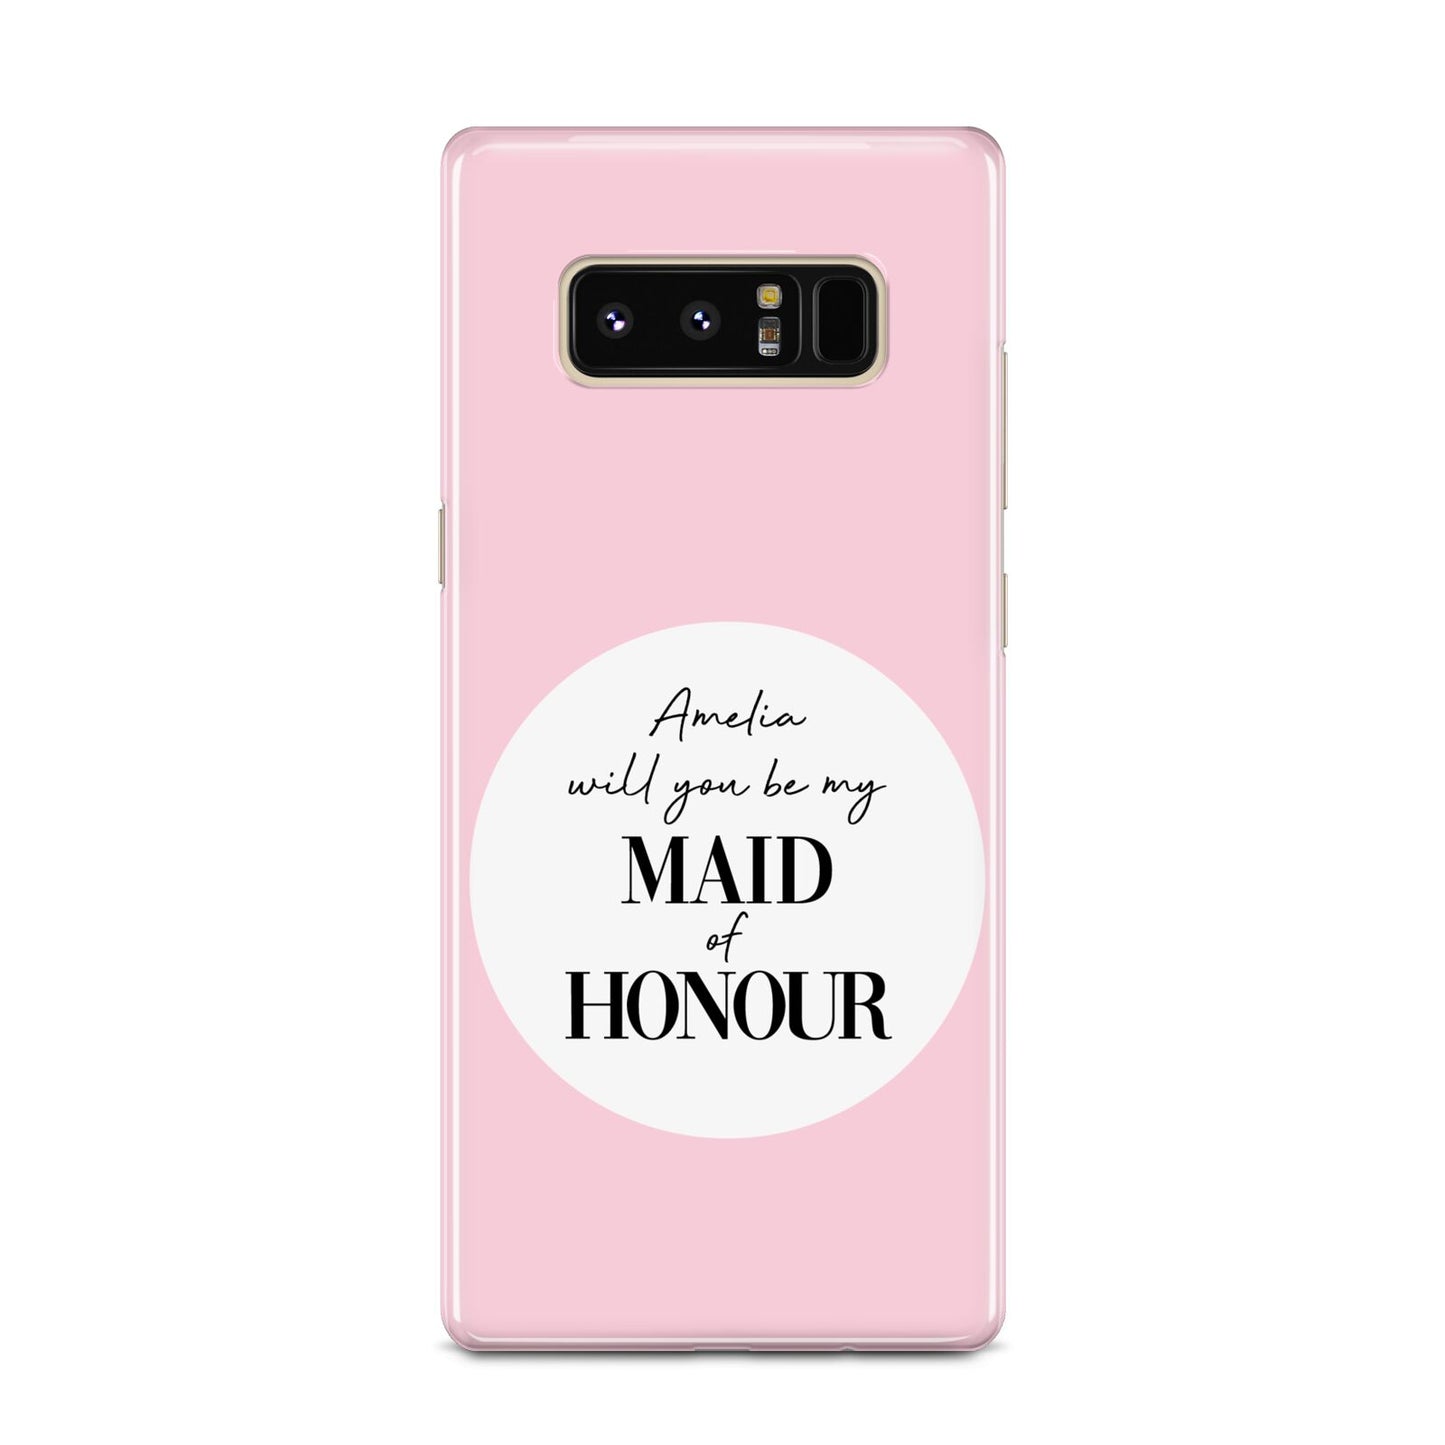 Will You Be My Maid Of Honour Samsung Galaxy Note 8 Case